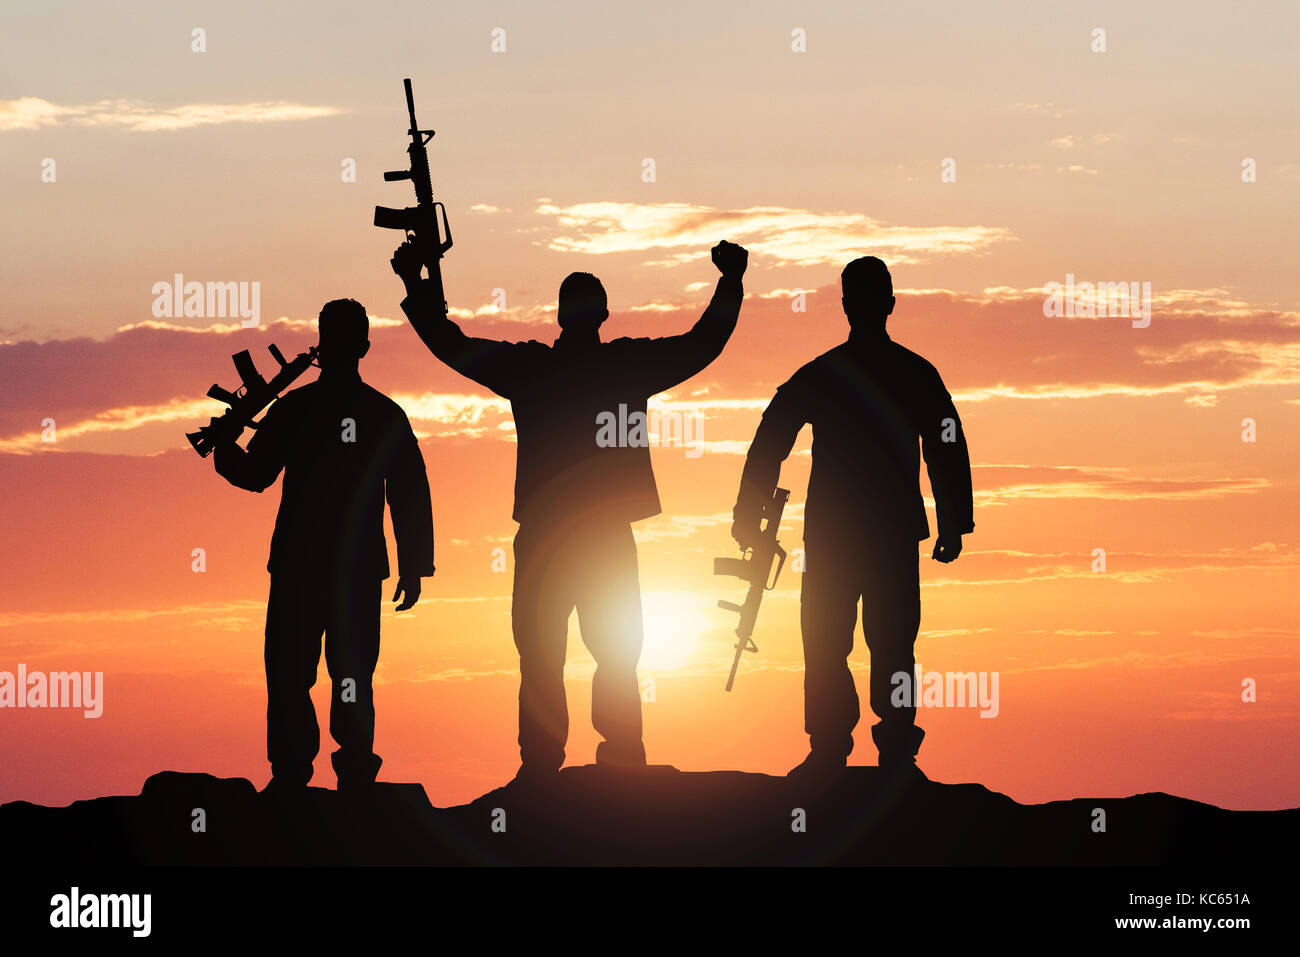 Silhouette Of Soldiers With Rifles Against Dramatic Sky Stock Photo